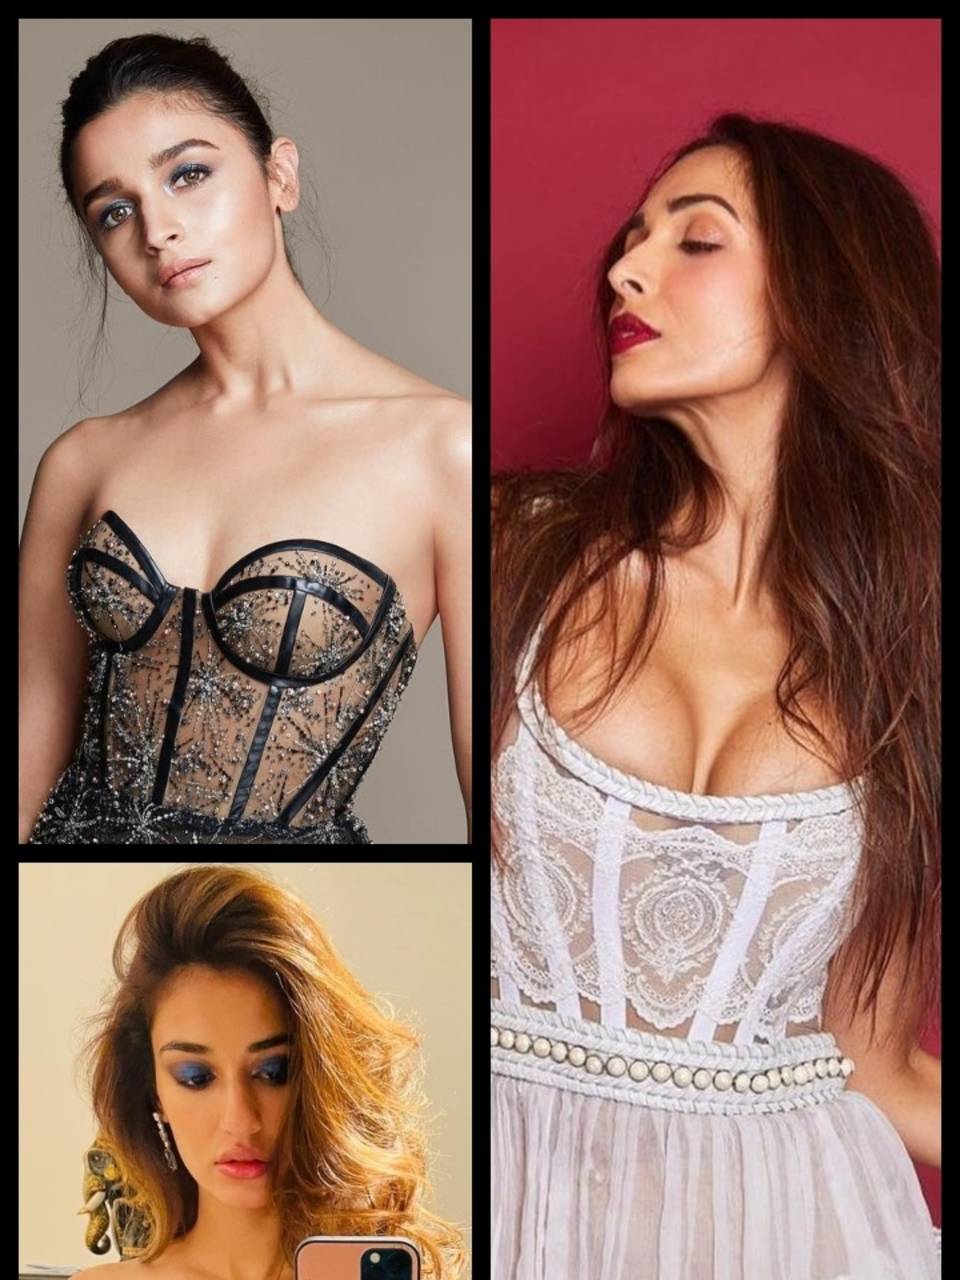 Bollywood celebrities are obsessed with wearing corsets